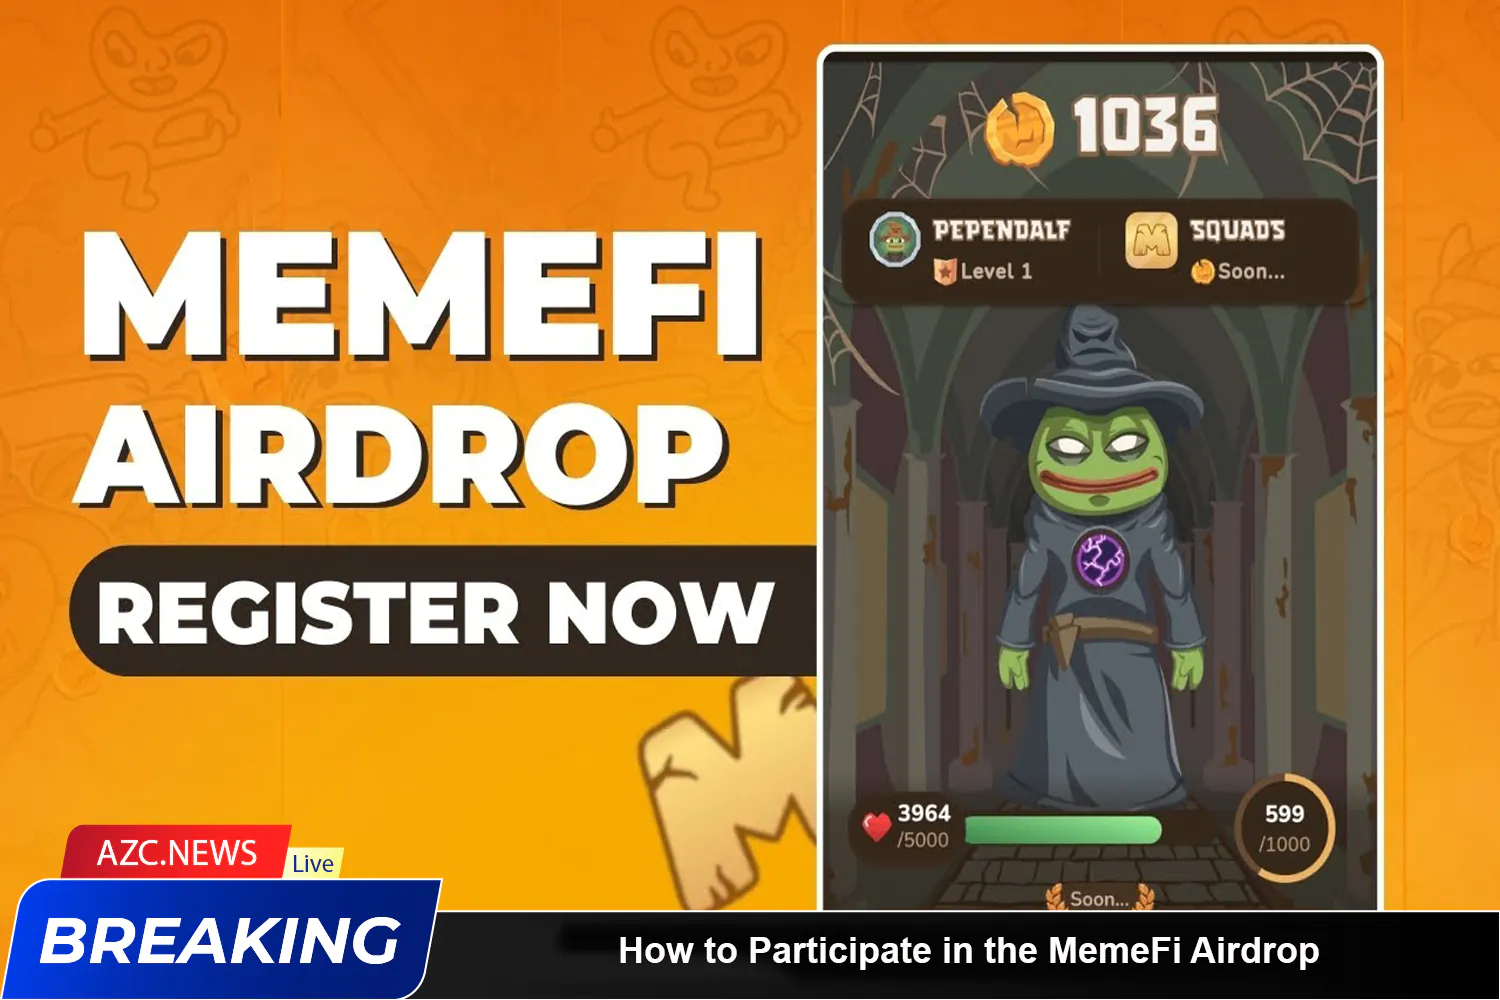 How To Participate In The Memefi Airdrop